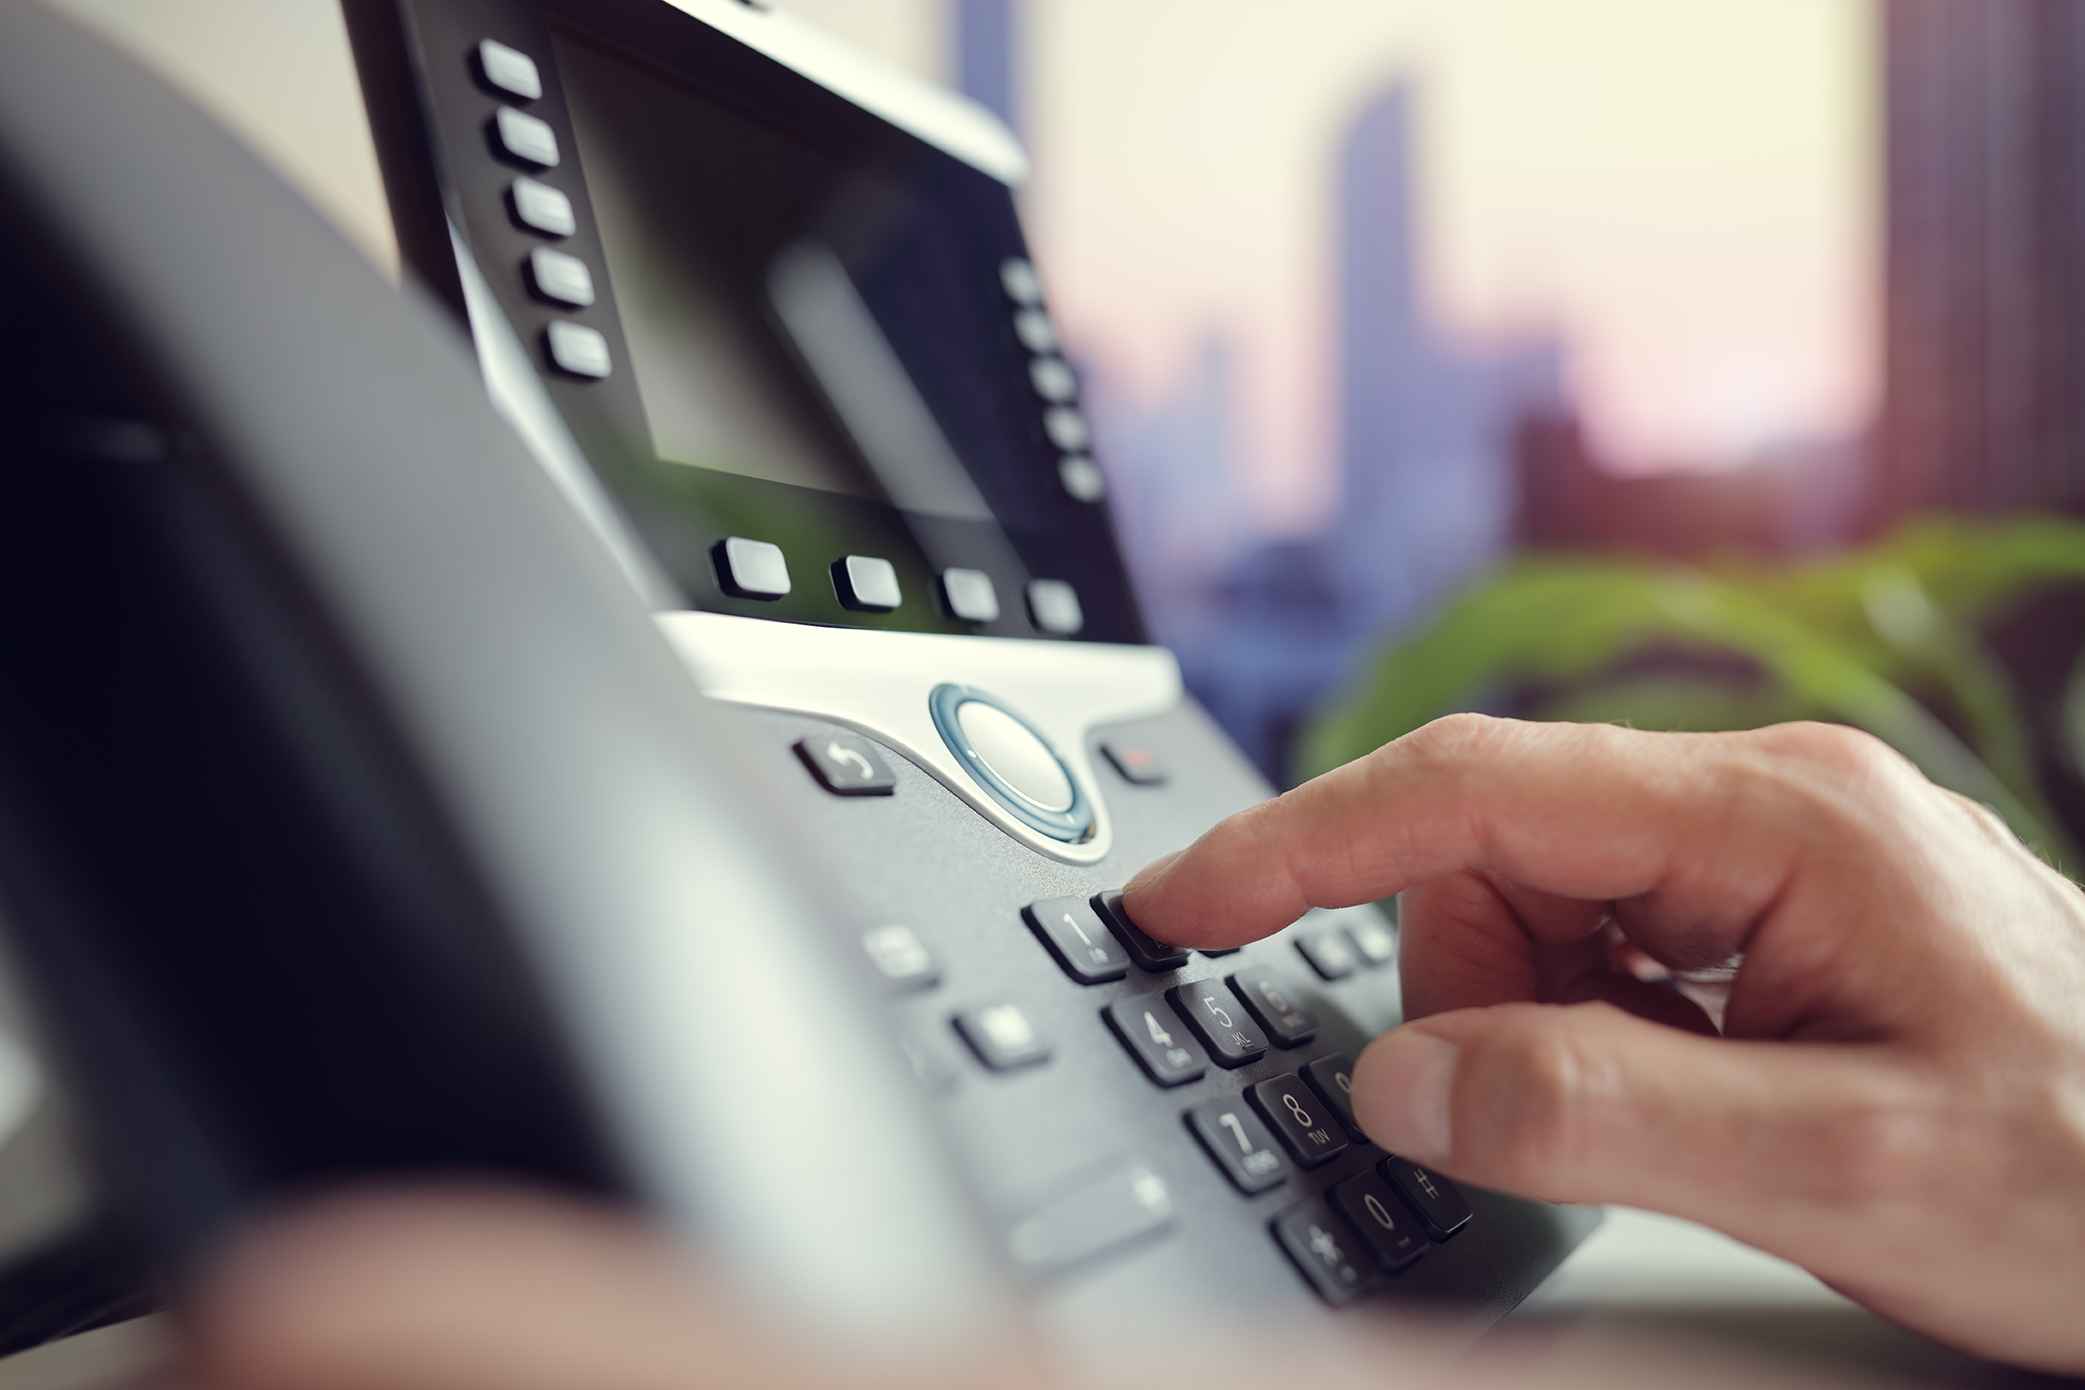 cox-business-sip-and-pri-trunking-services